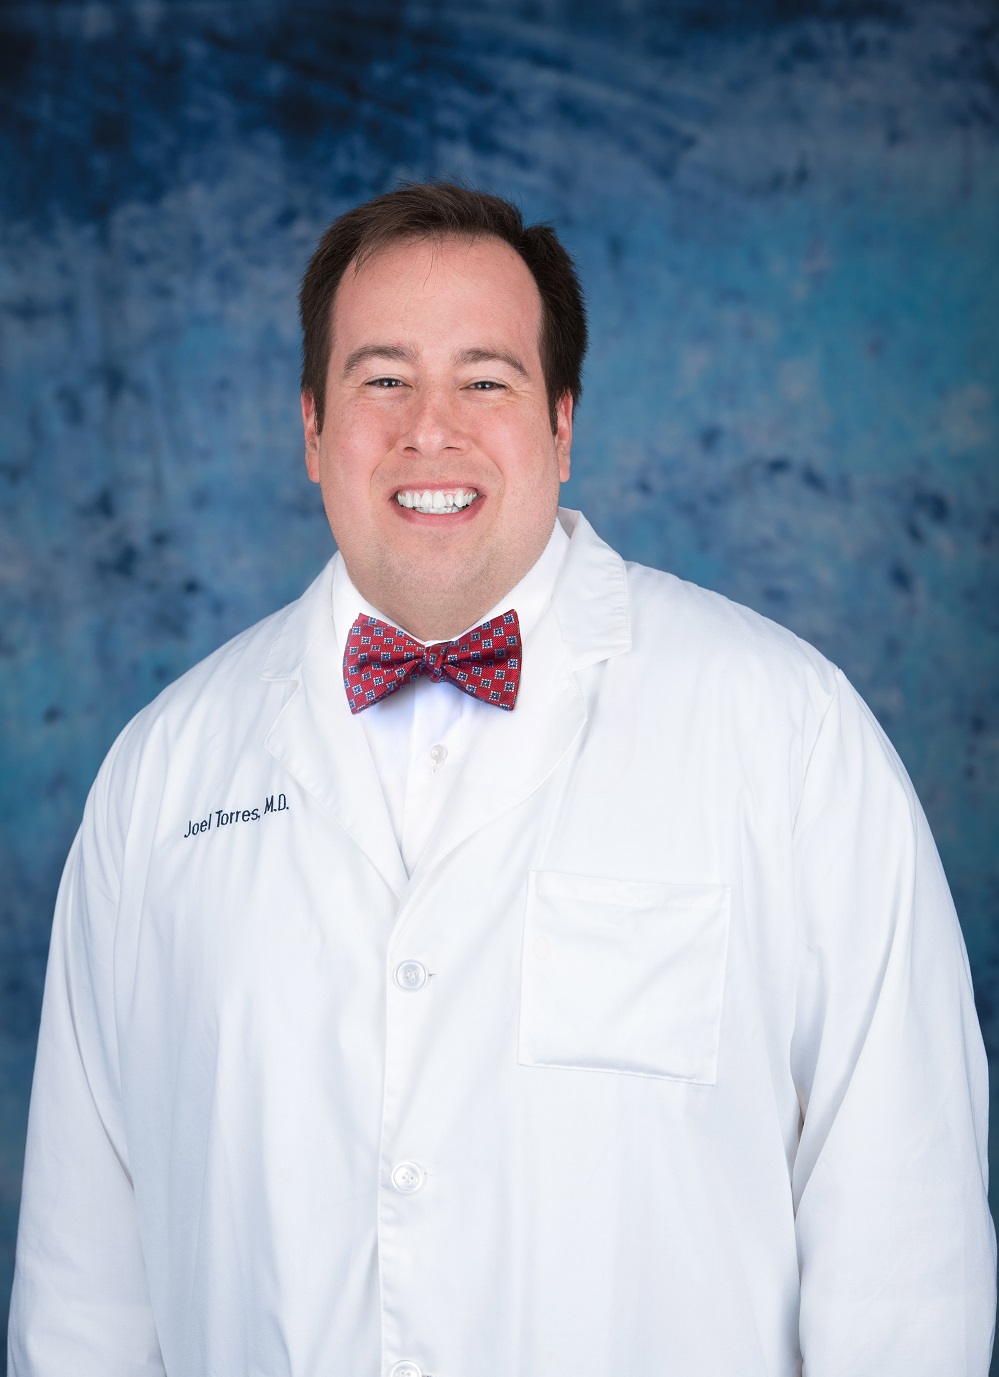 Joel Torres, MD of Knoxville Neurology Specialists